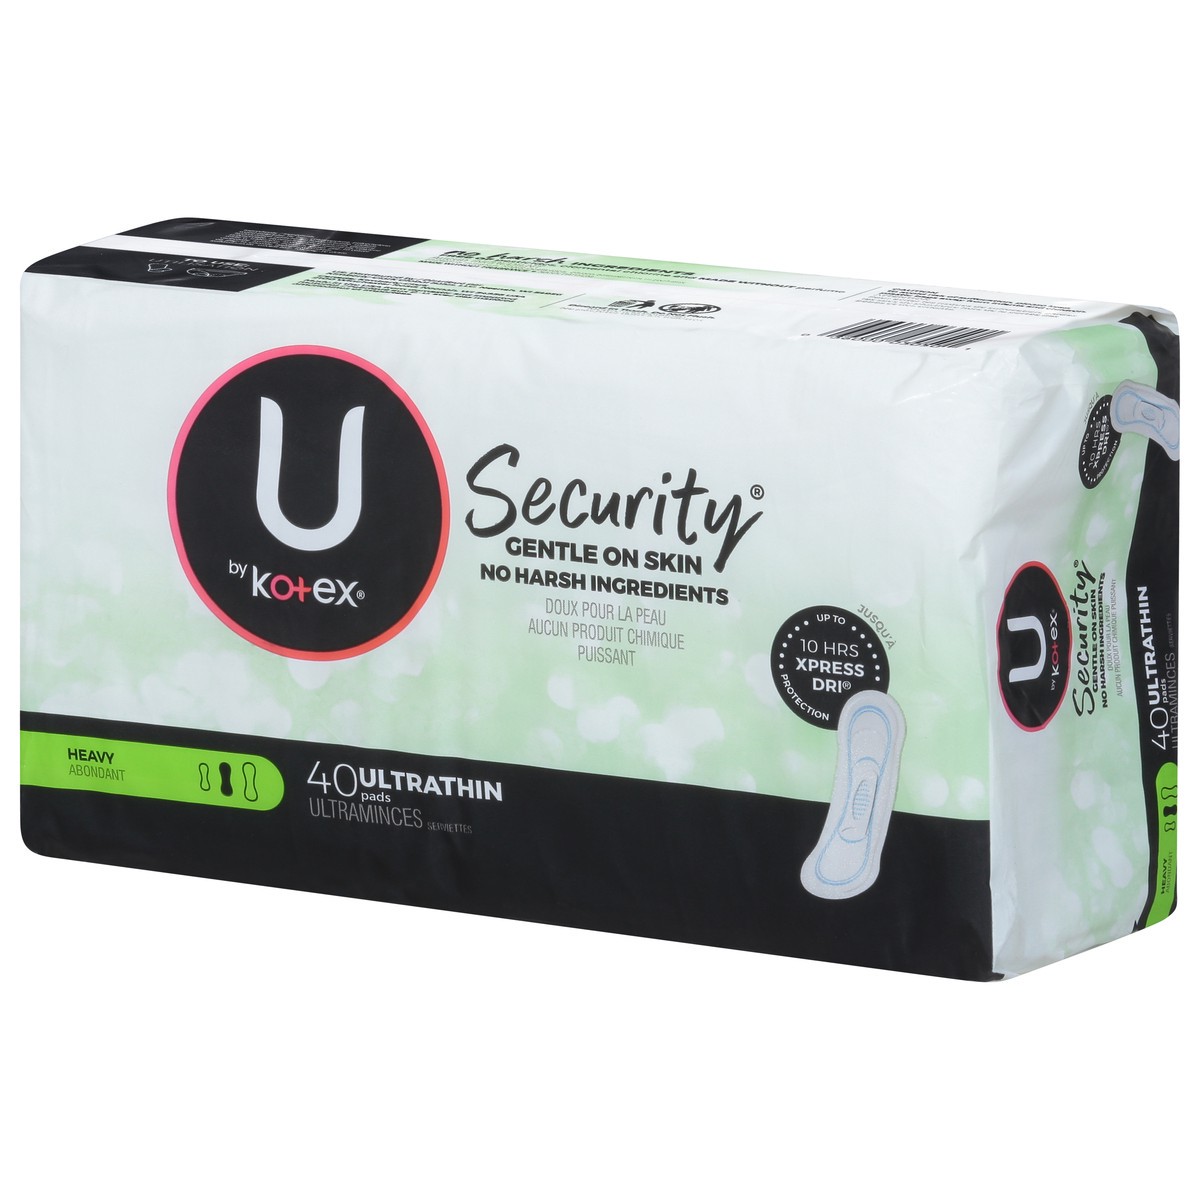 slide 8 of 16, U by Kotex Security Heavy Ultra Thin Pads 40 ea, 40 ct